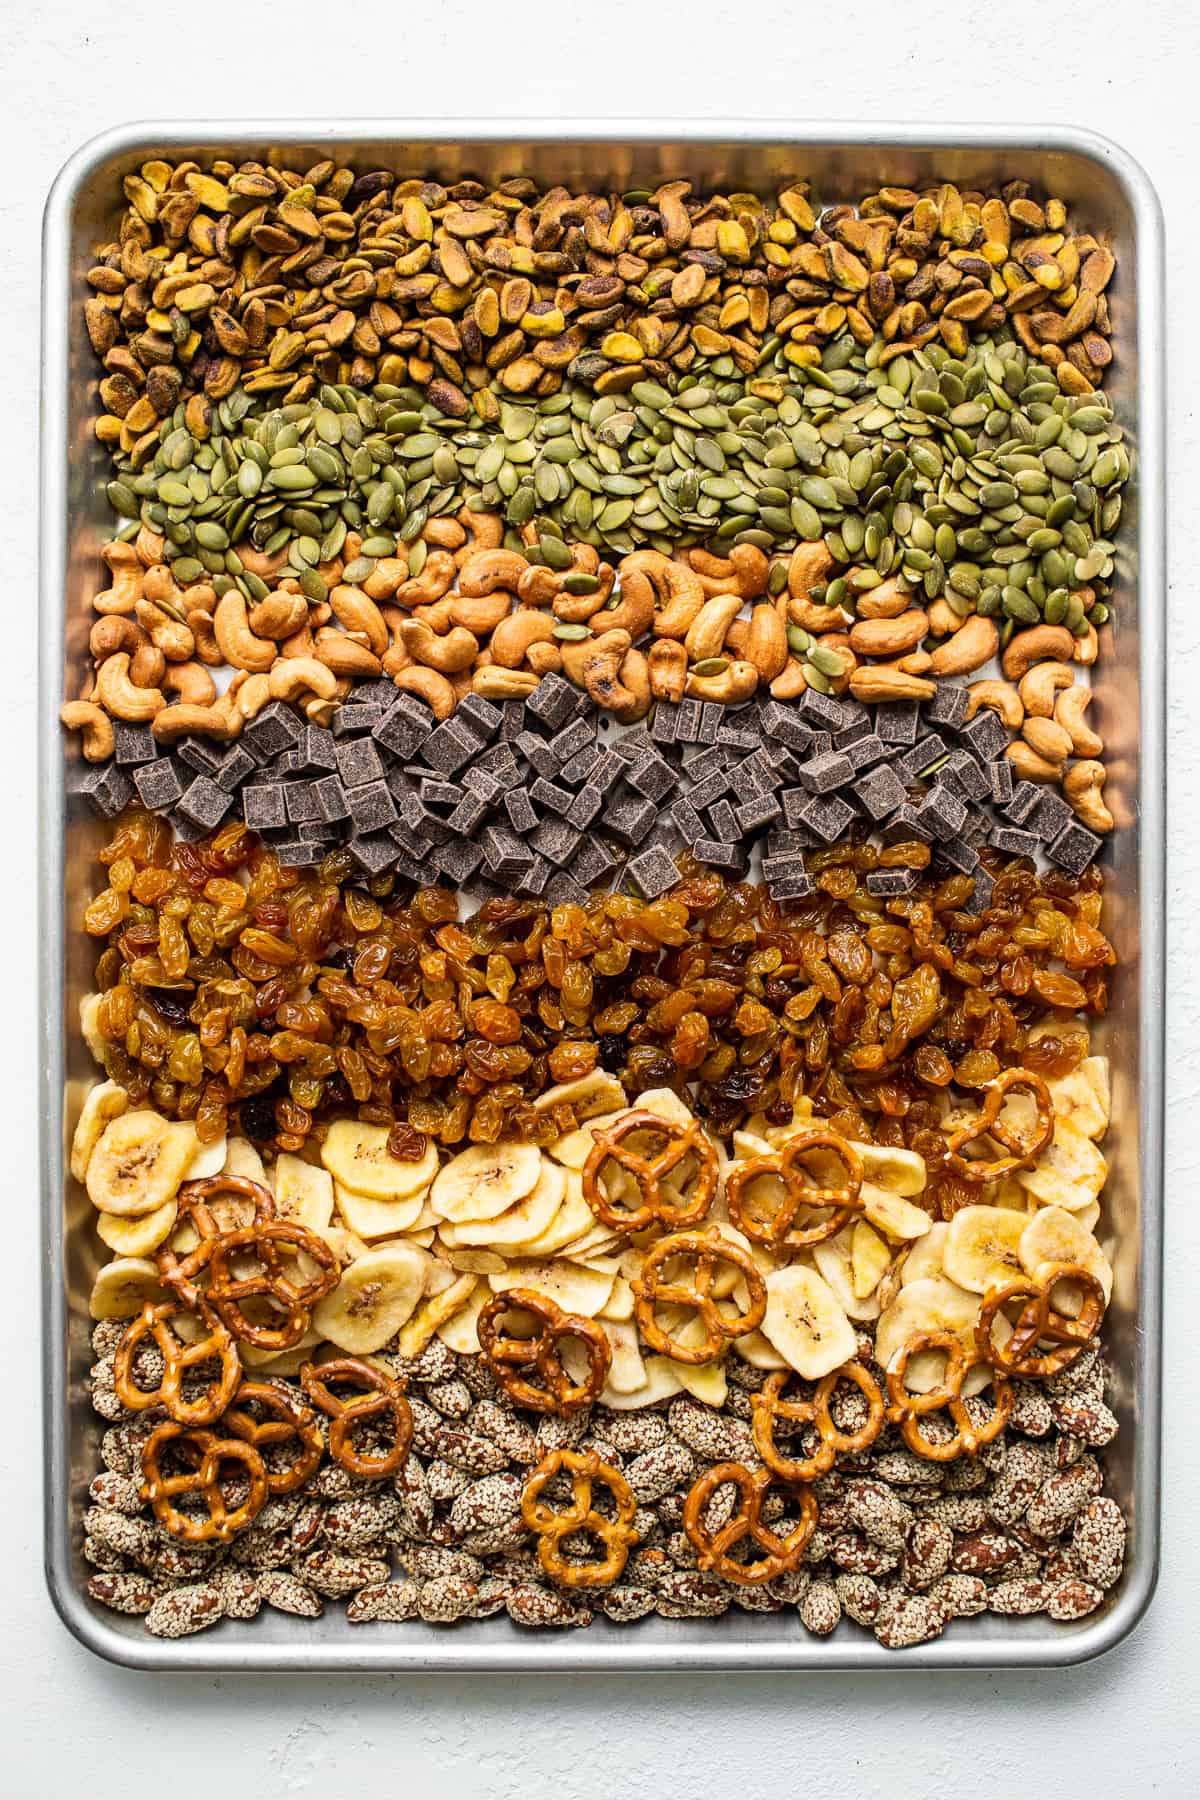 Homemade trail mix ingredients on a baking sheet.